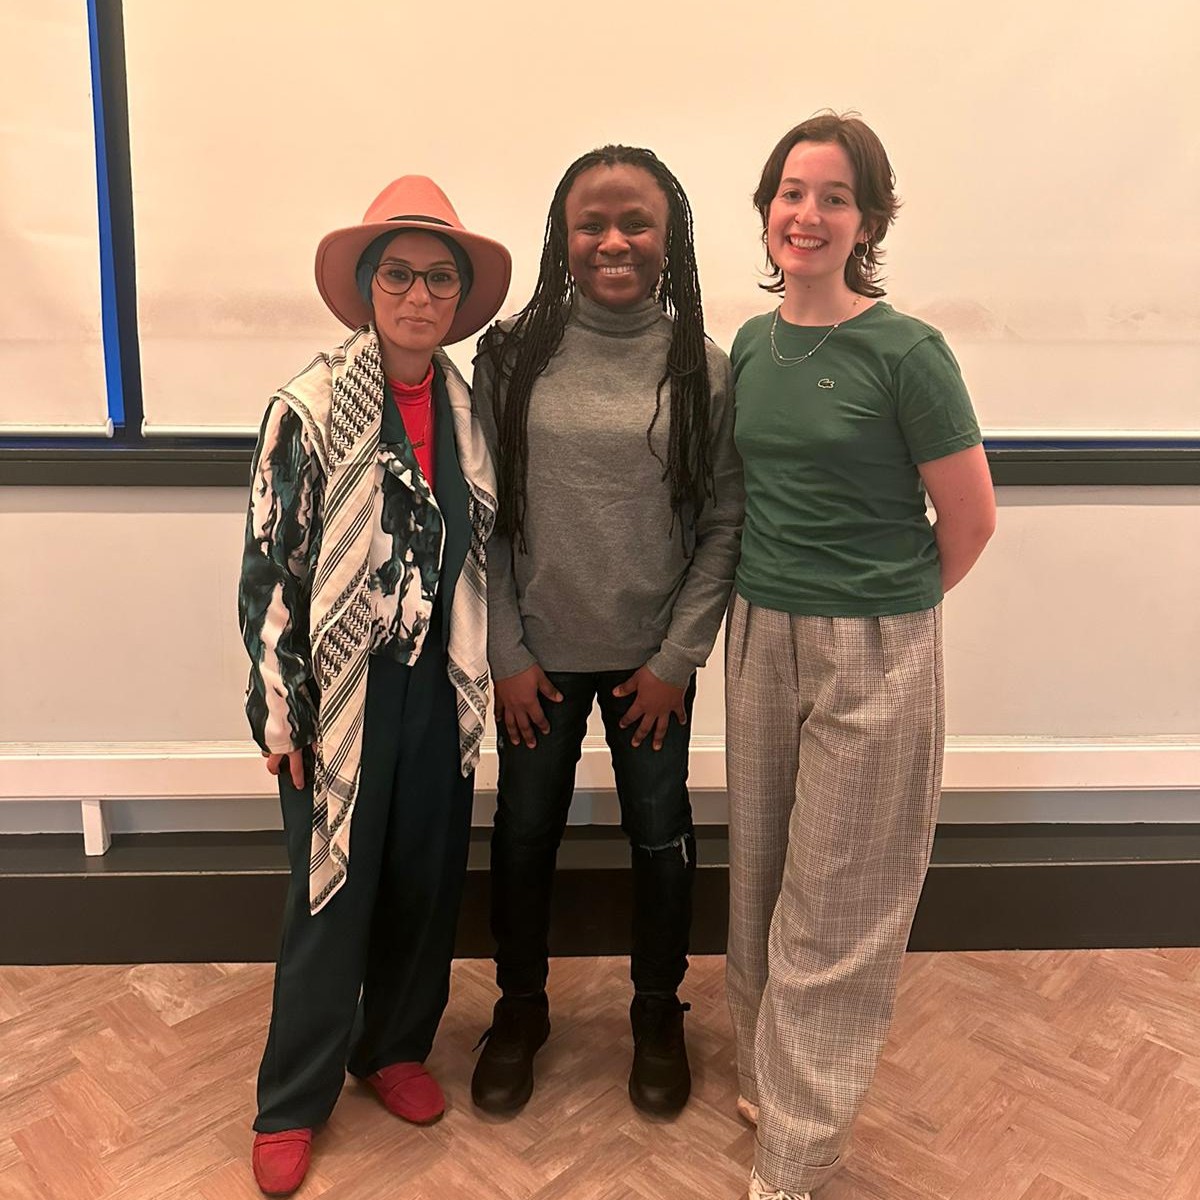 A huge thanks to everyone who joined us at @WritersBlockWM last week! With sharings from @Voiceofthepoets, @writewithtayo & Wallis Allen 🙌 Watch this space for the next event date and how you can get involved and share your work 👀